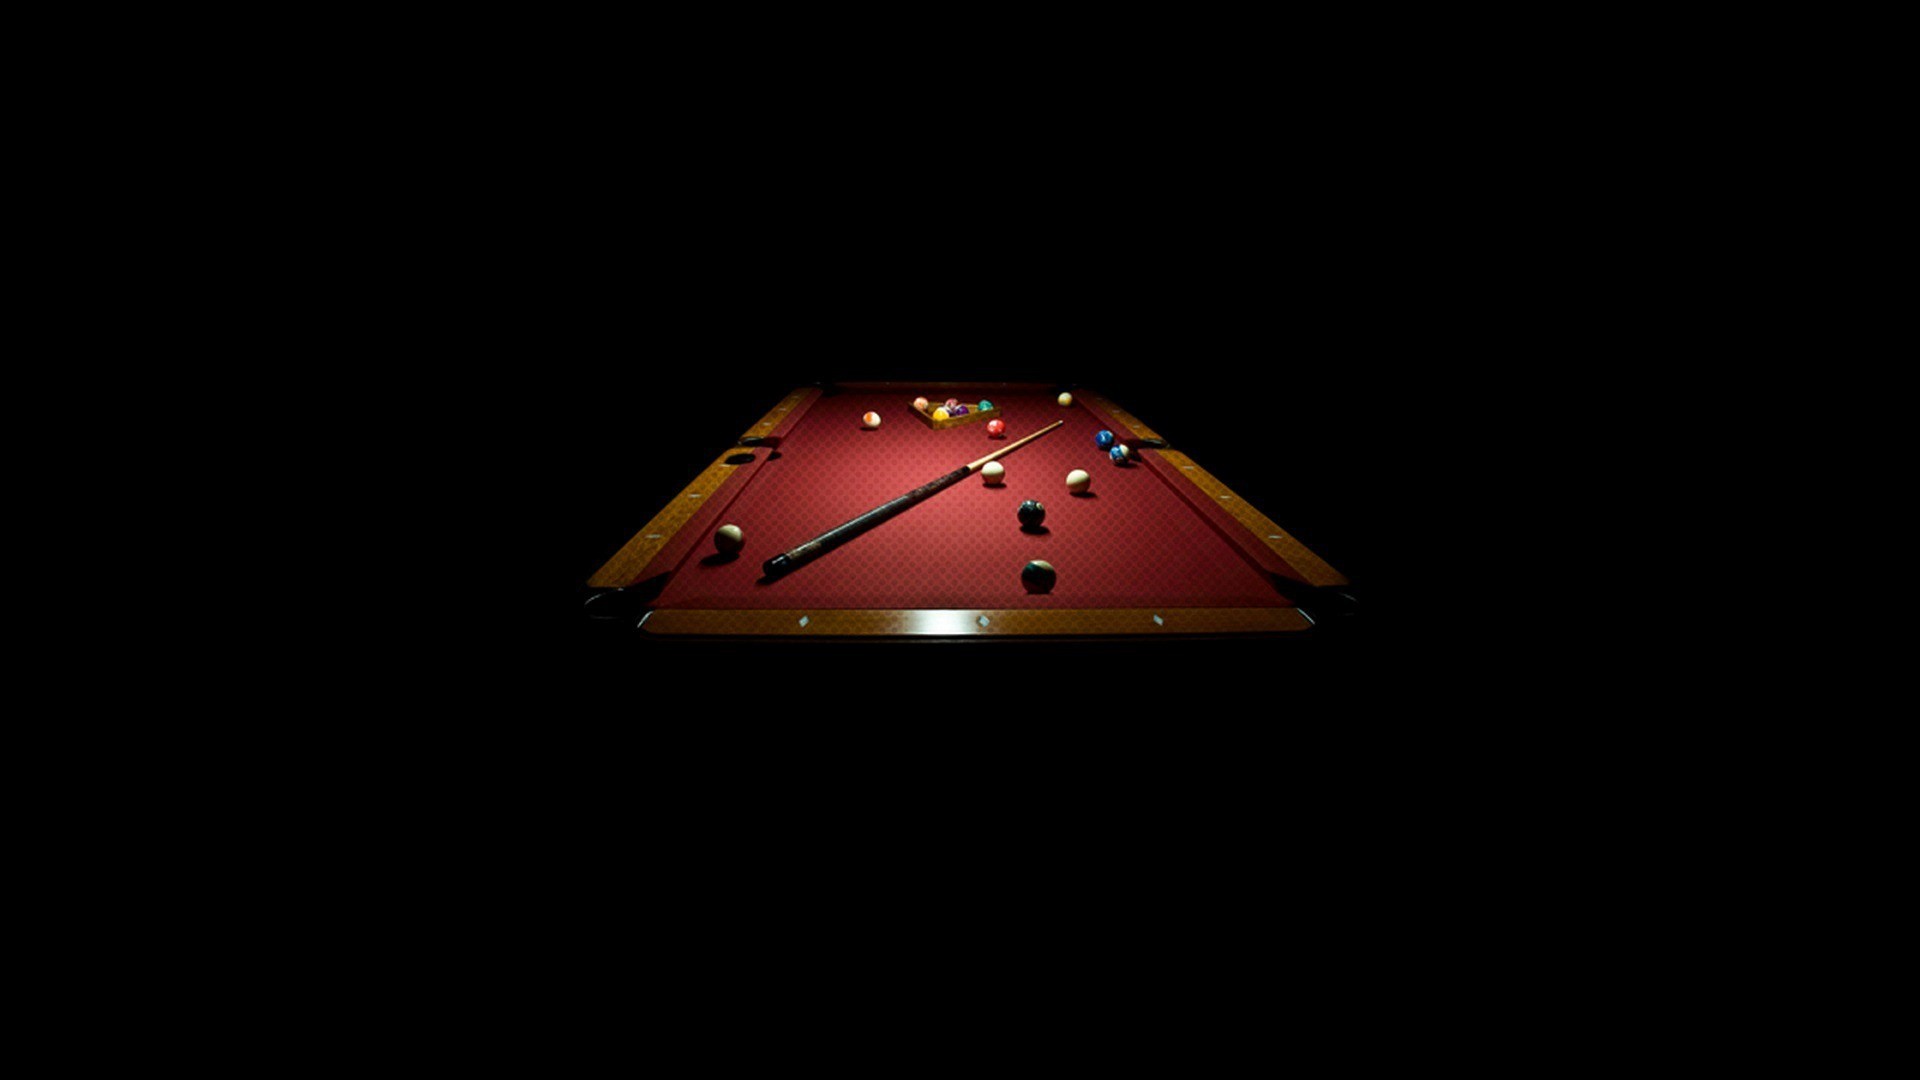 Pool table in red wallpapers and images - wallpapers ...